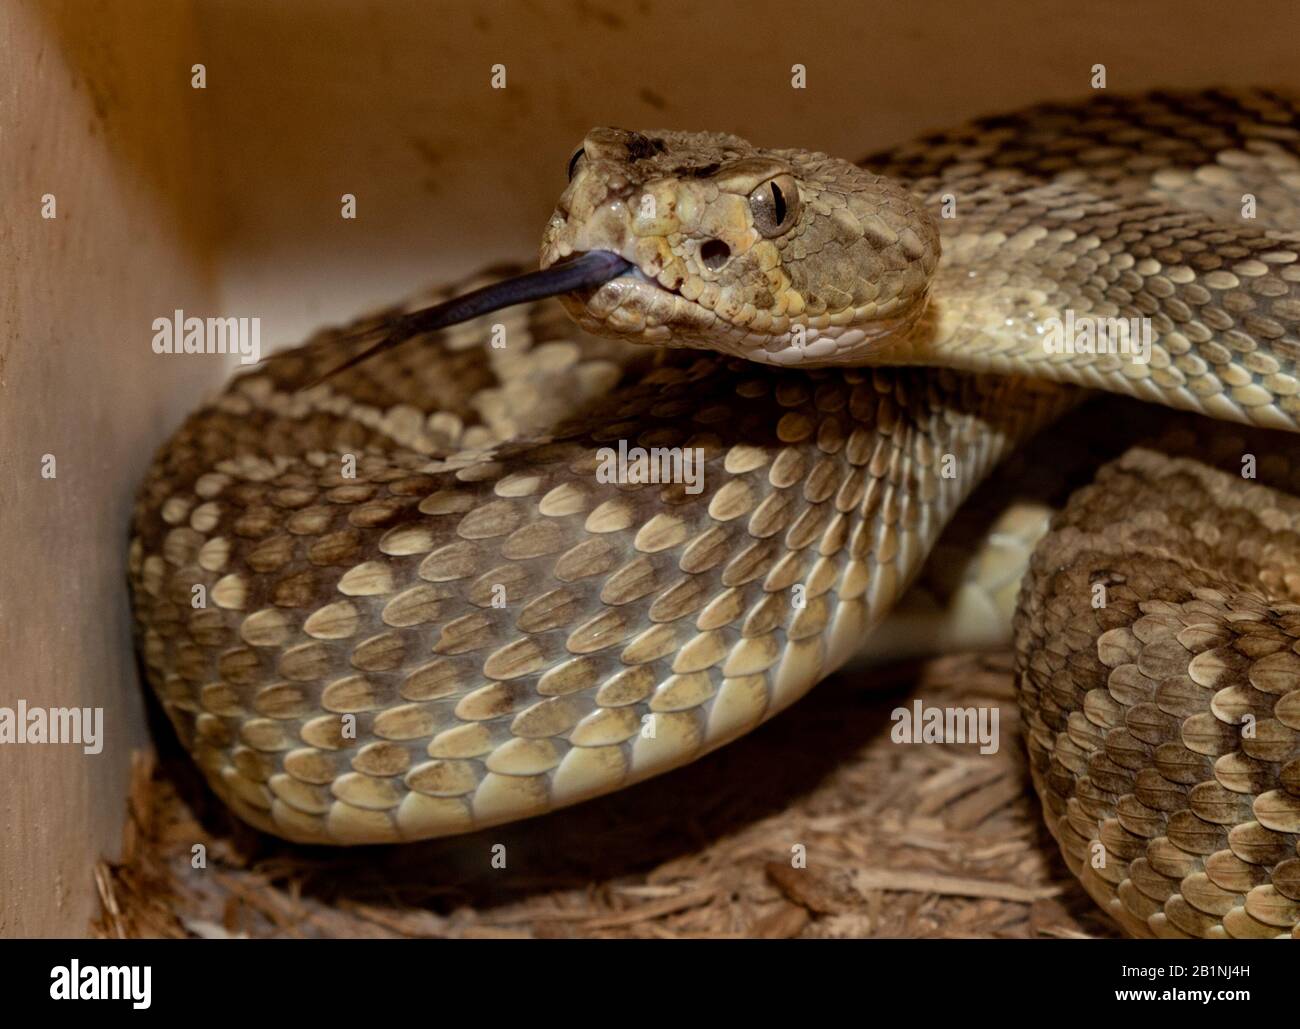 american rattle snake with tongue out Stock Photo